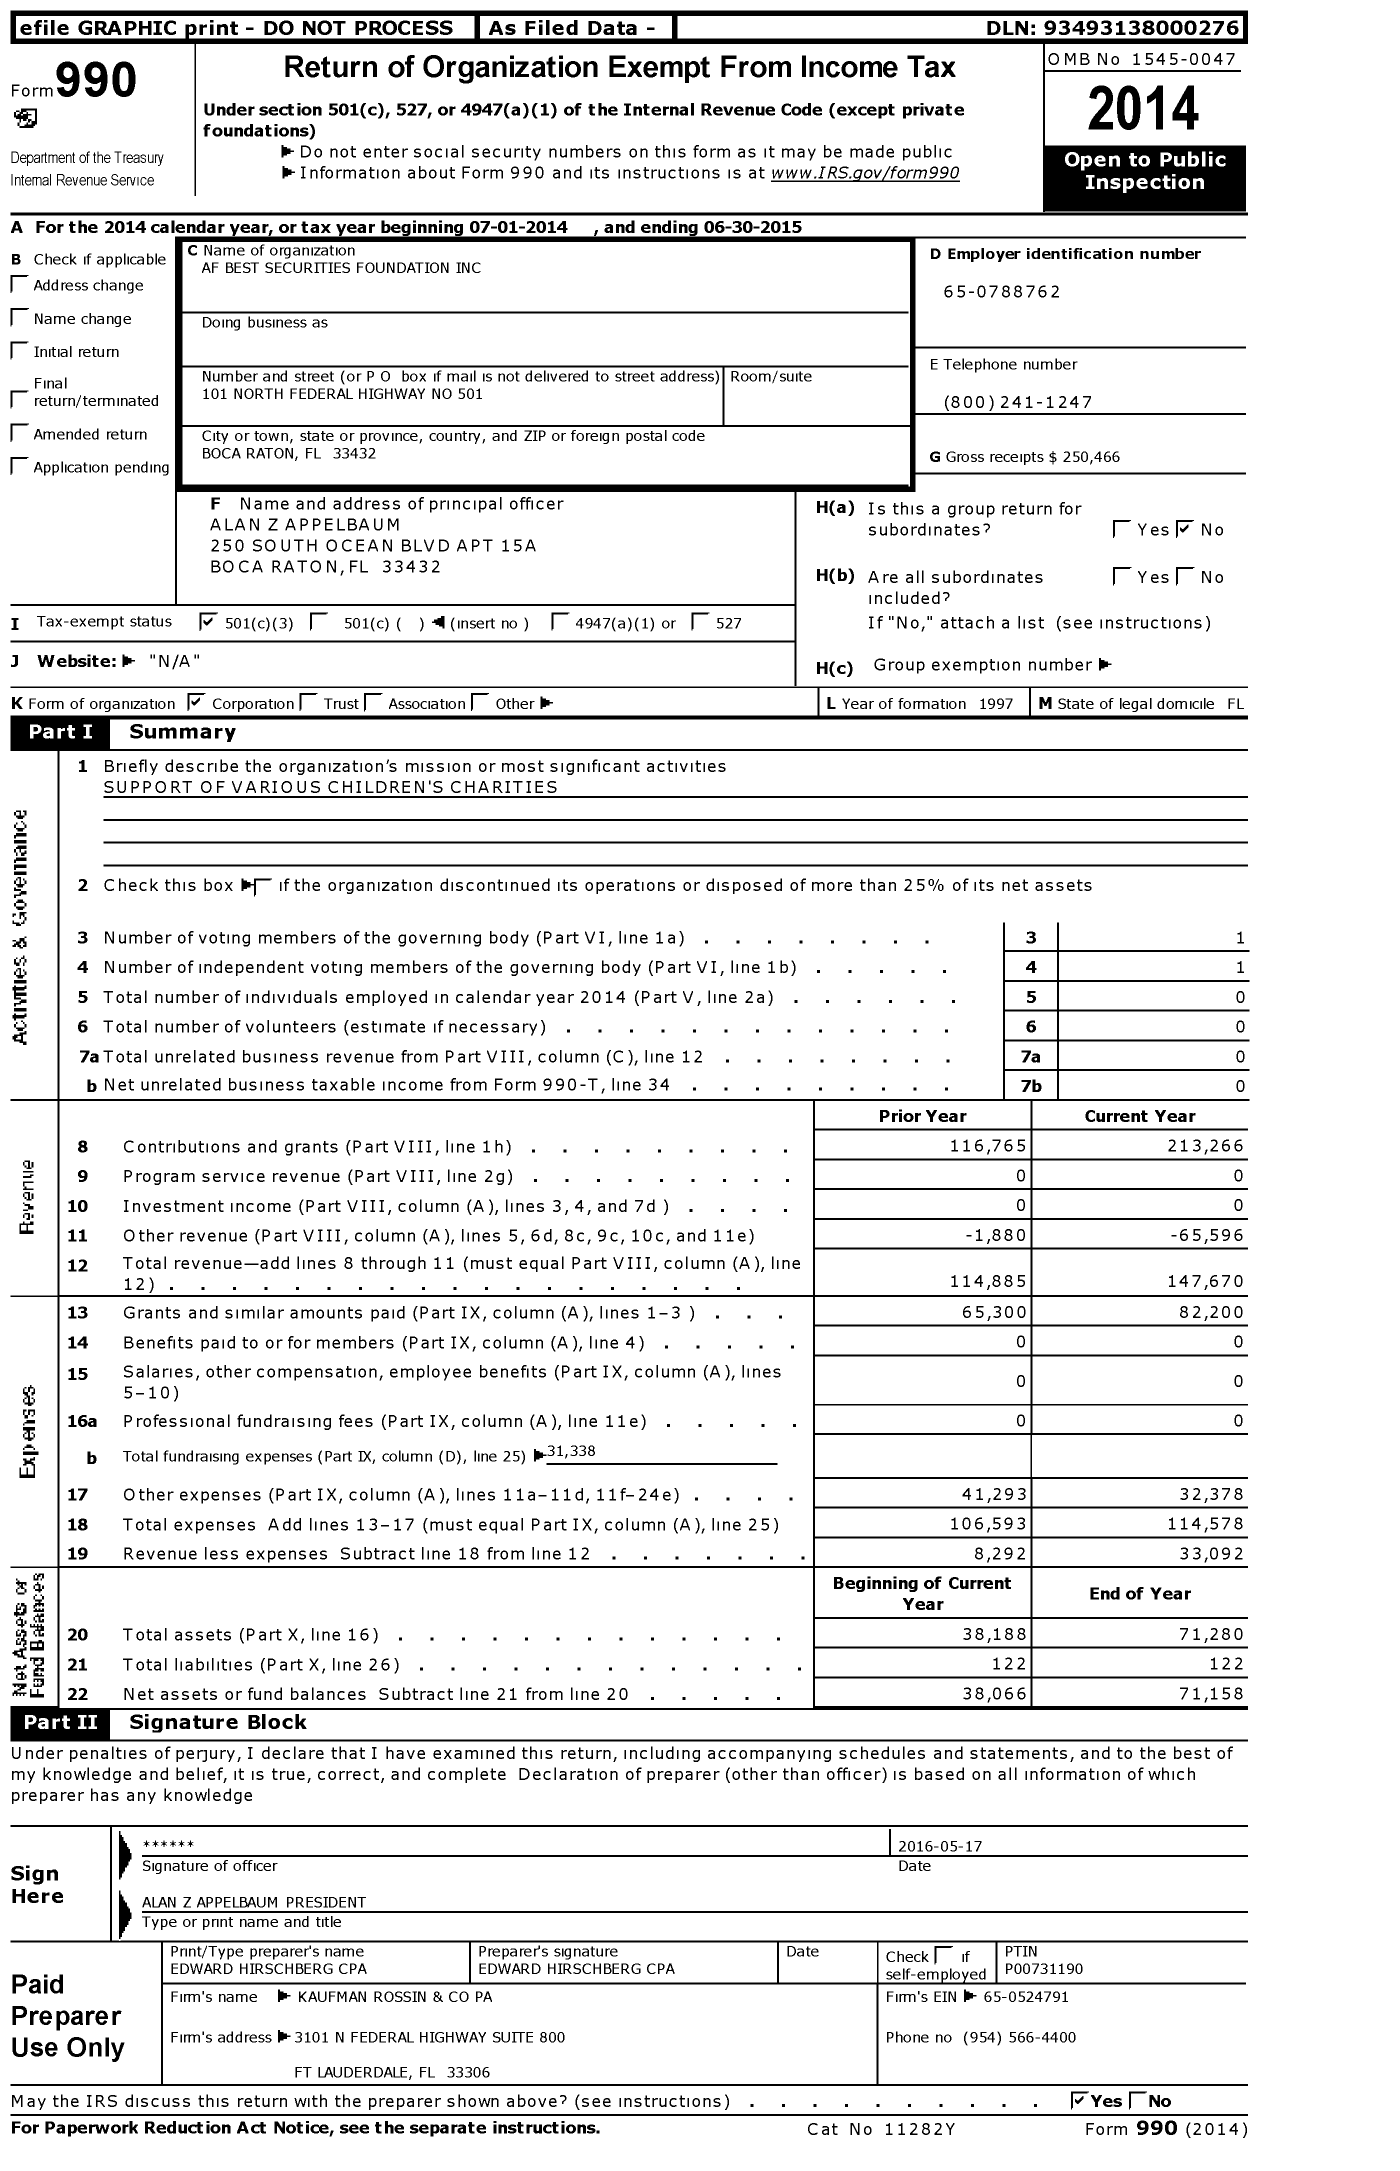 Image of first page of 2014 Form 990 for Af Best Securities Foundation